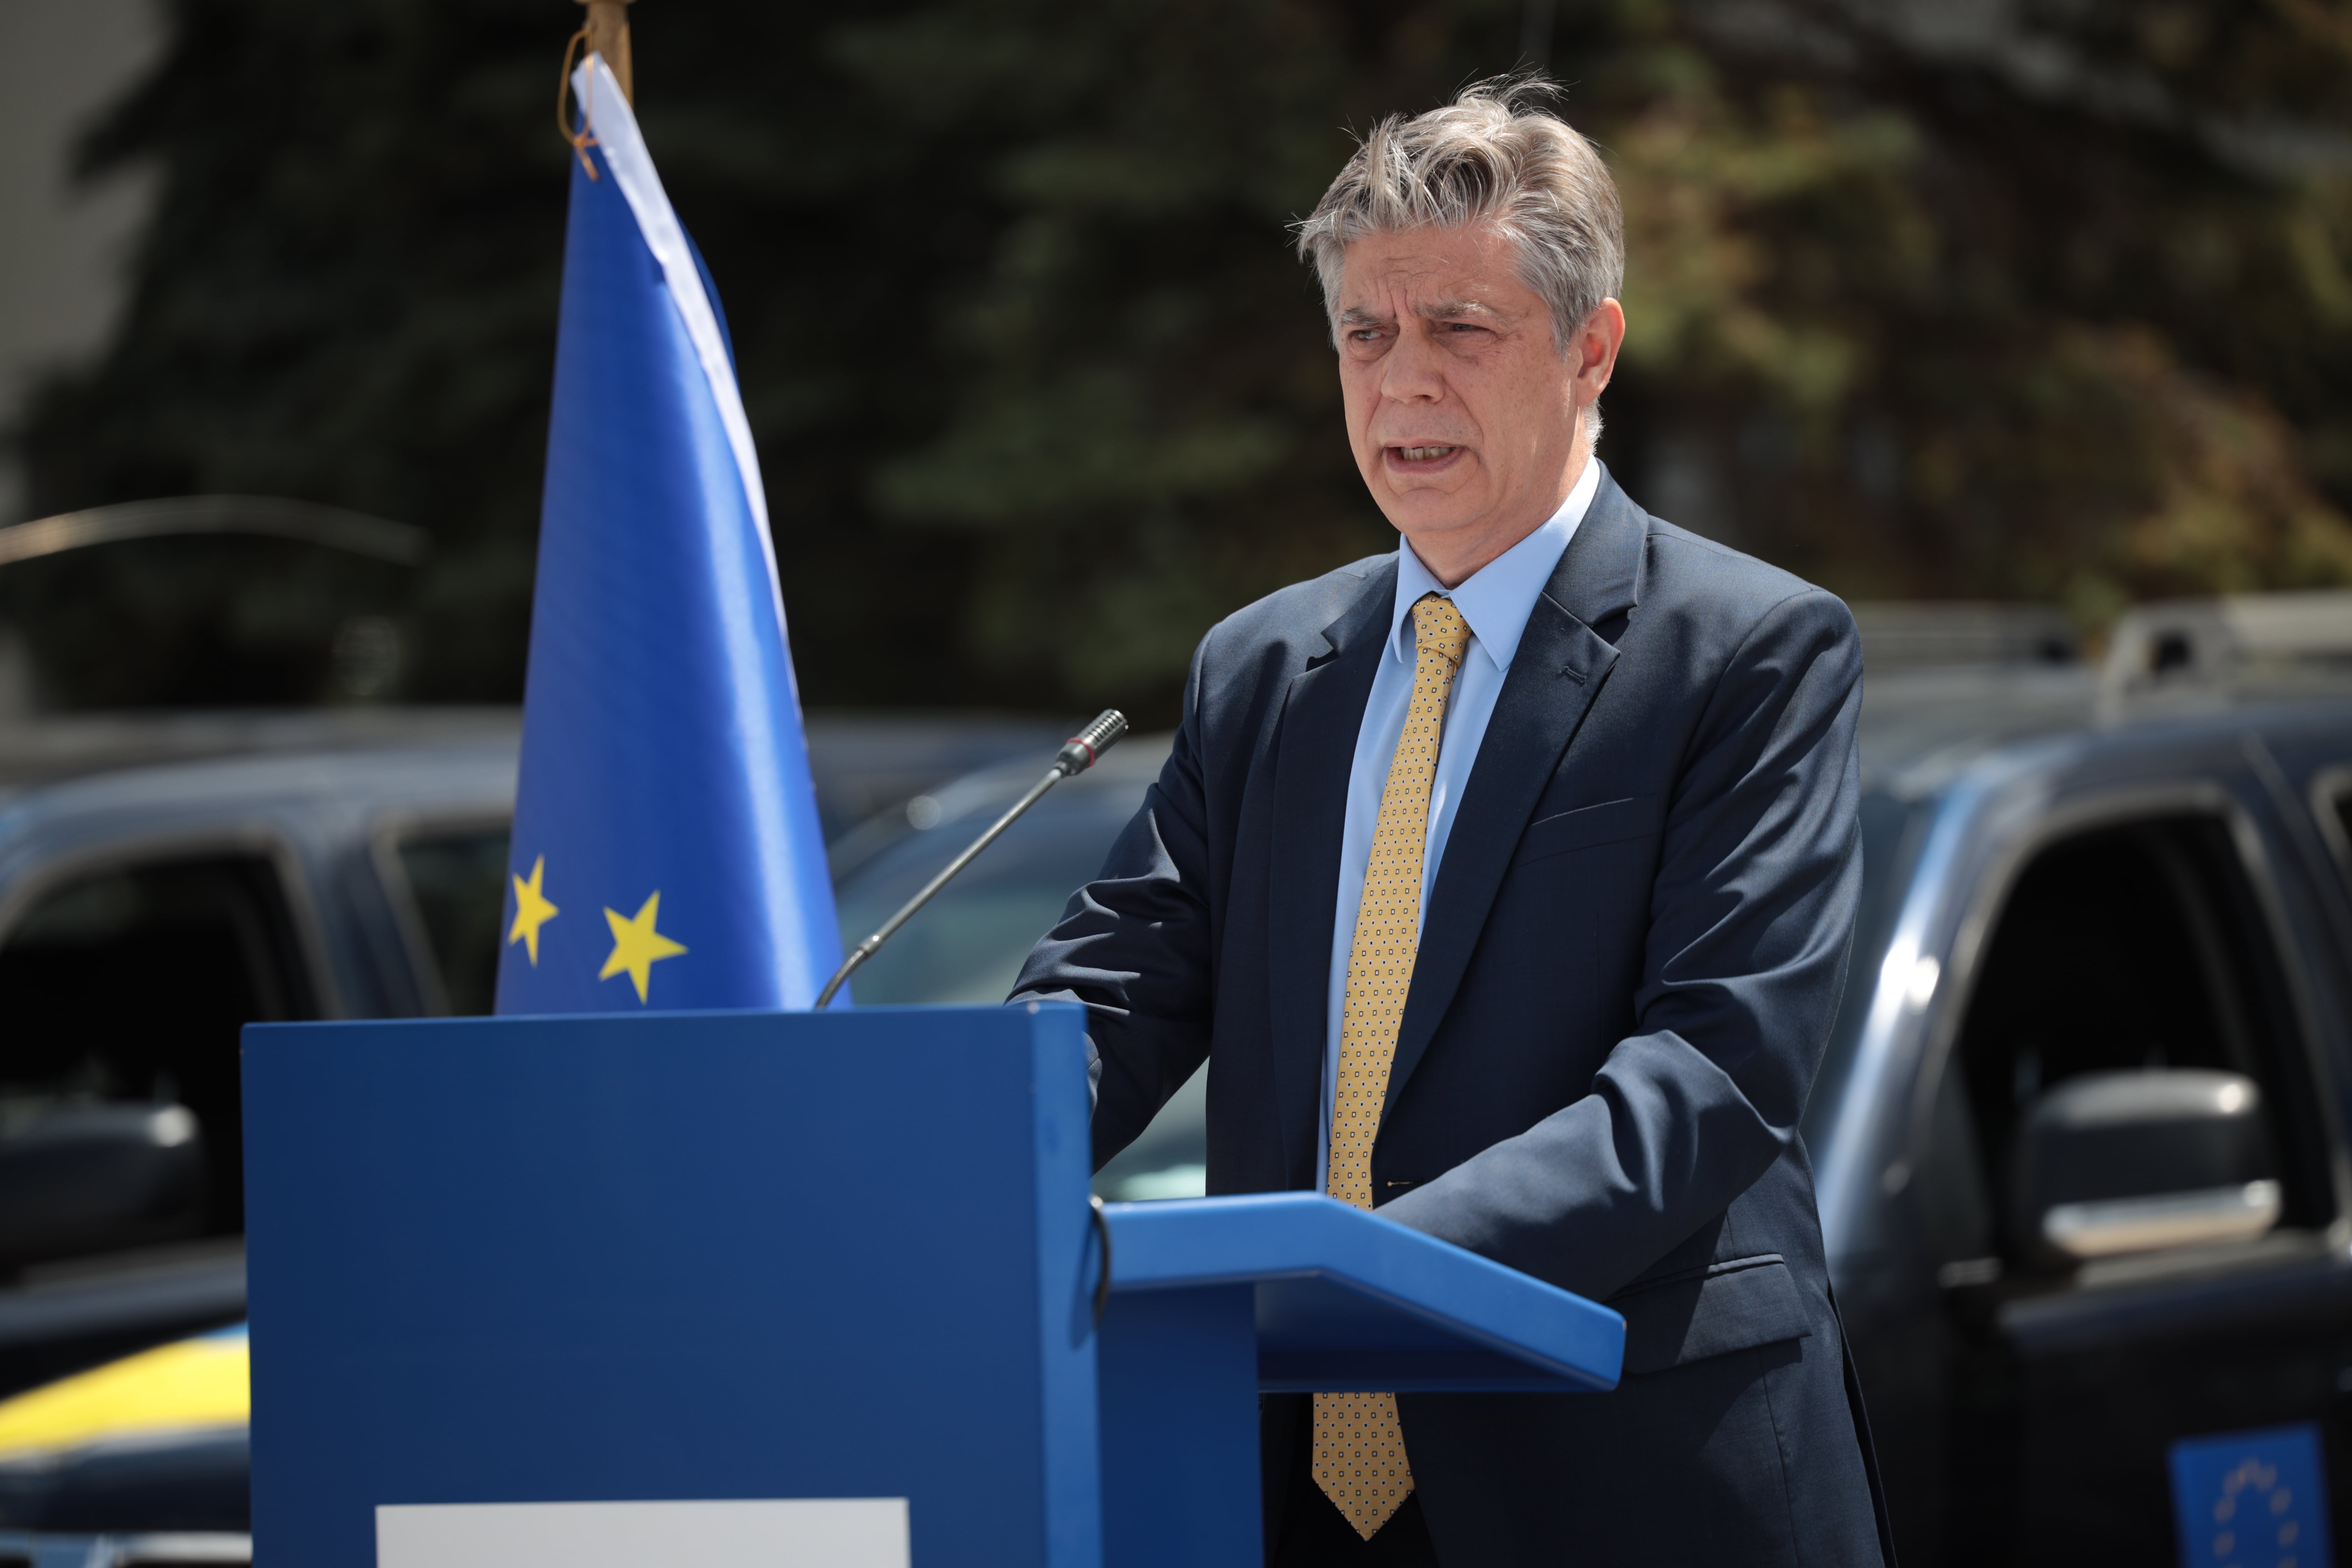 Speech by the Head of Mission during “EULEX Convoy for Ukraine”